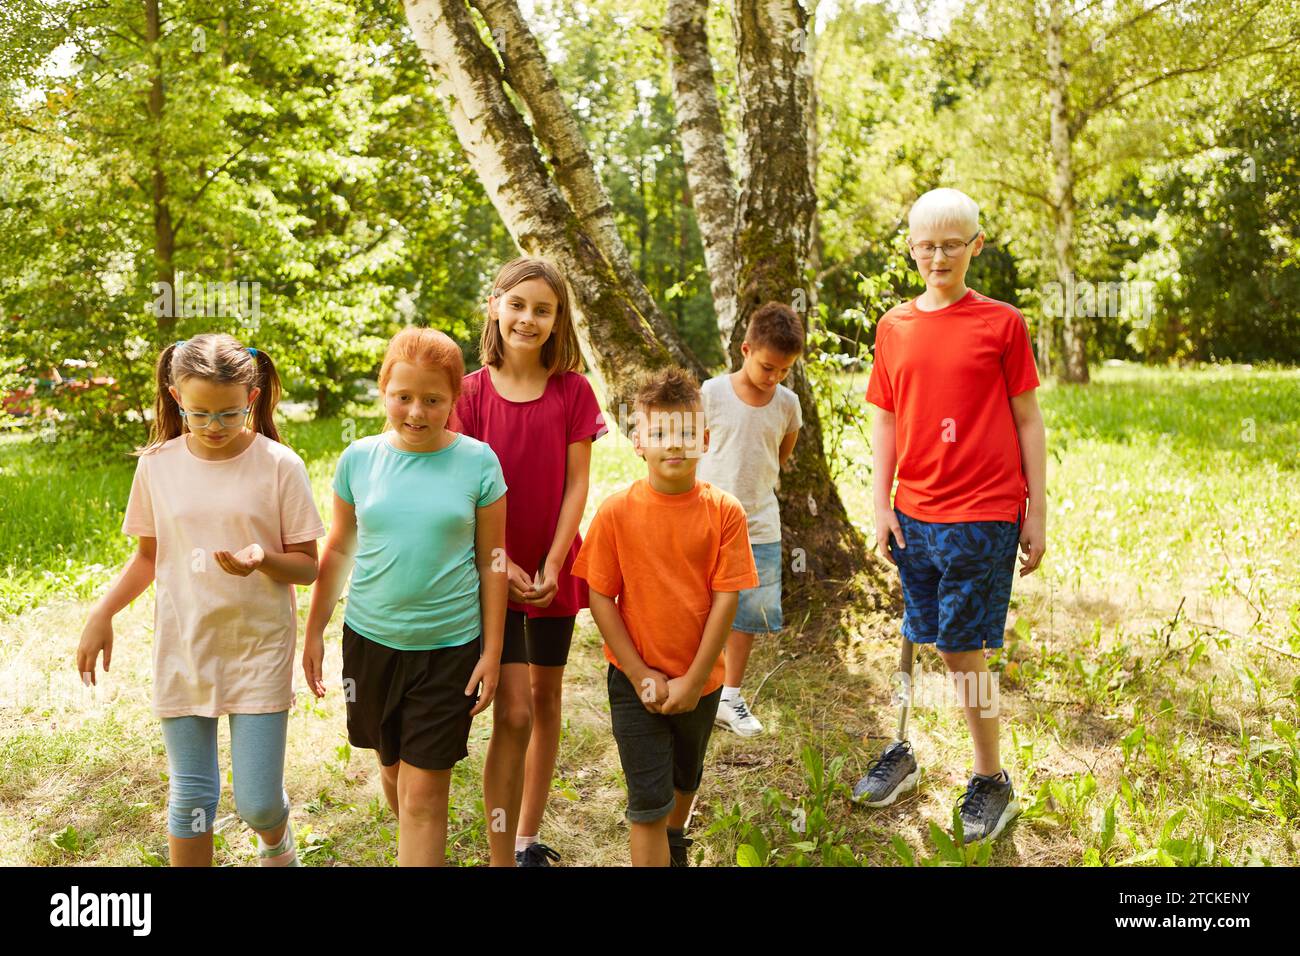 Portrait of smiling kids standing with male handicapped friend at park Stock Photo